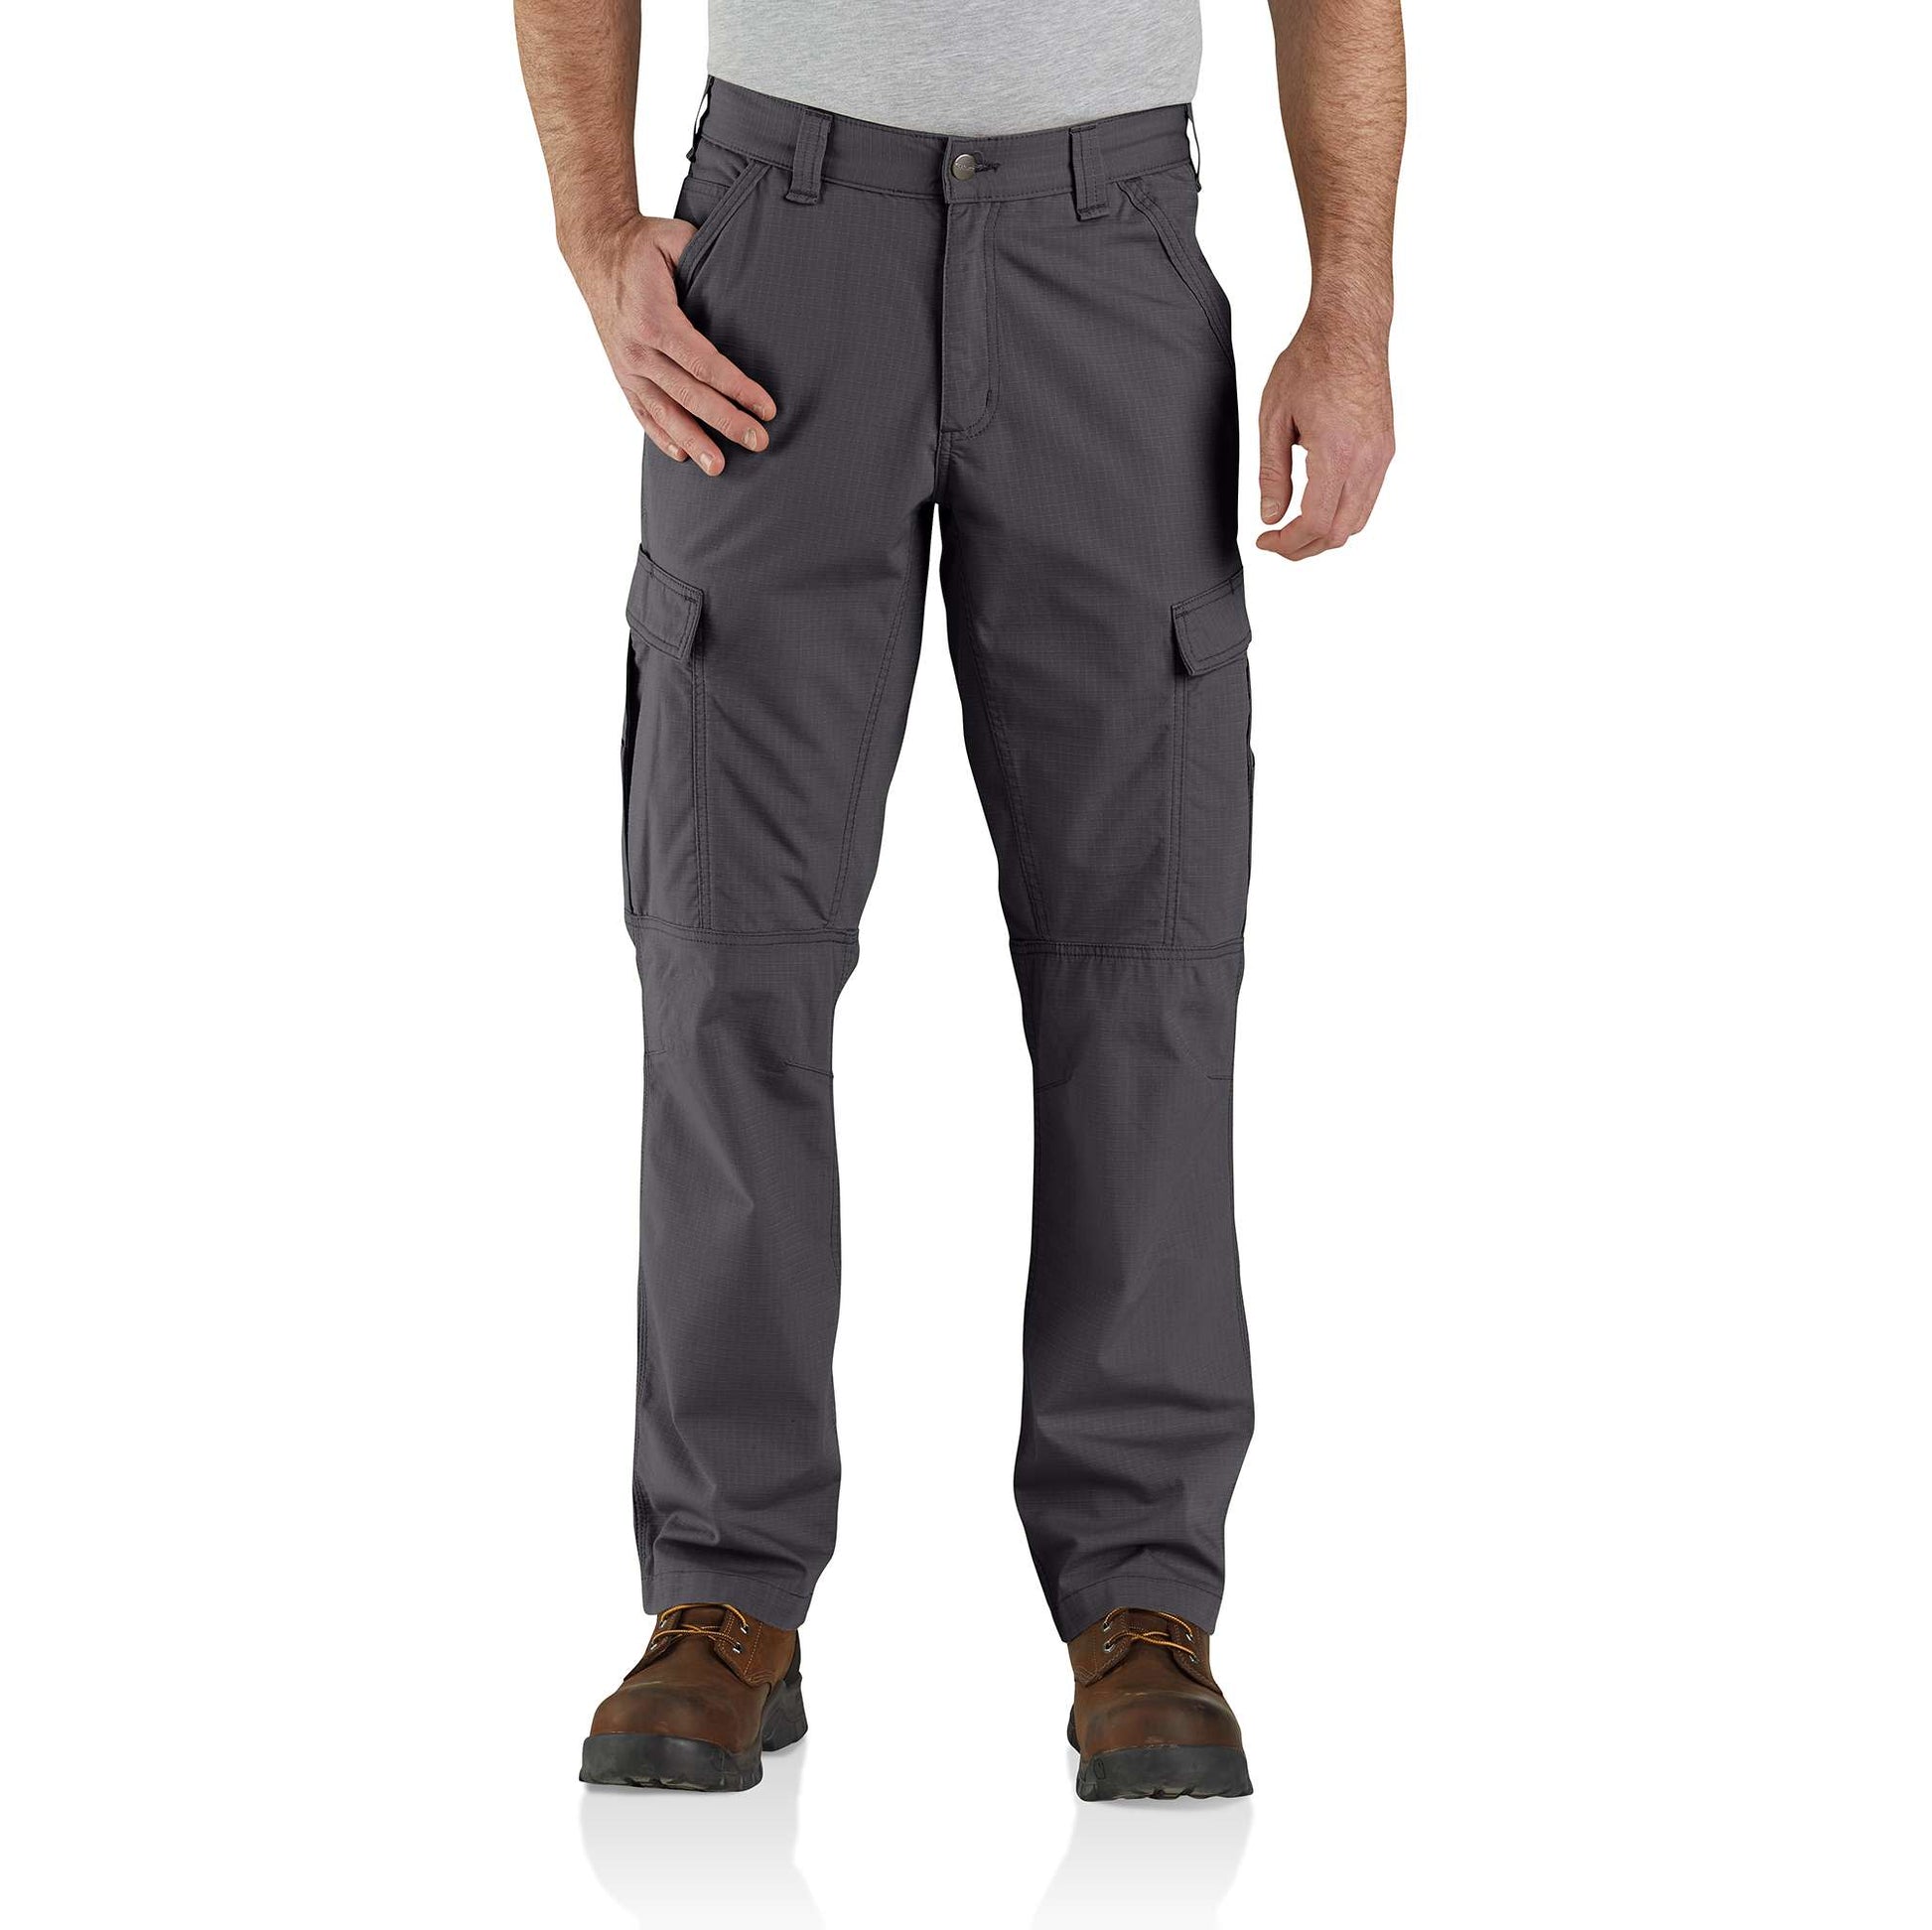 Carhartt Men's Force Relaxed Fit Ripstop Cargo Work Pant